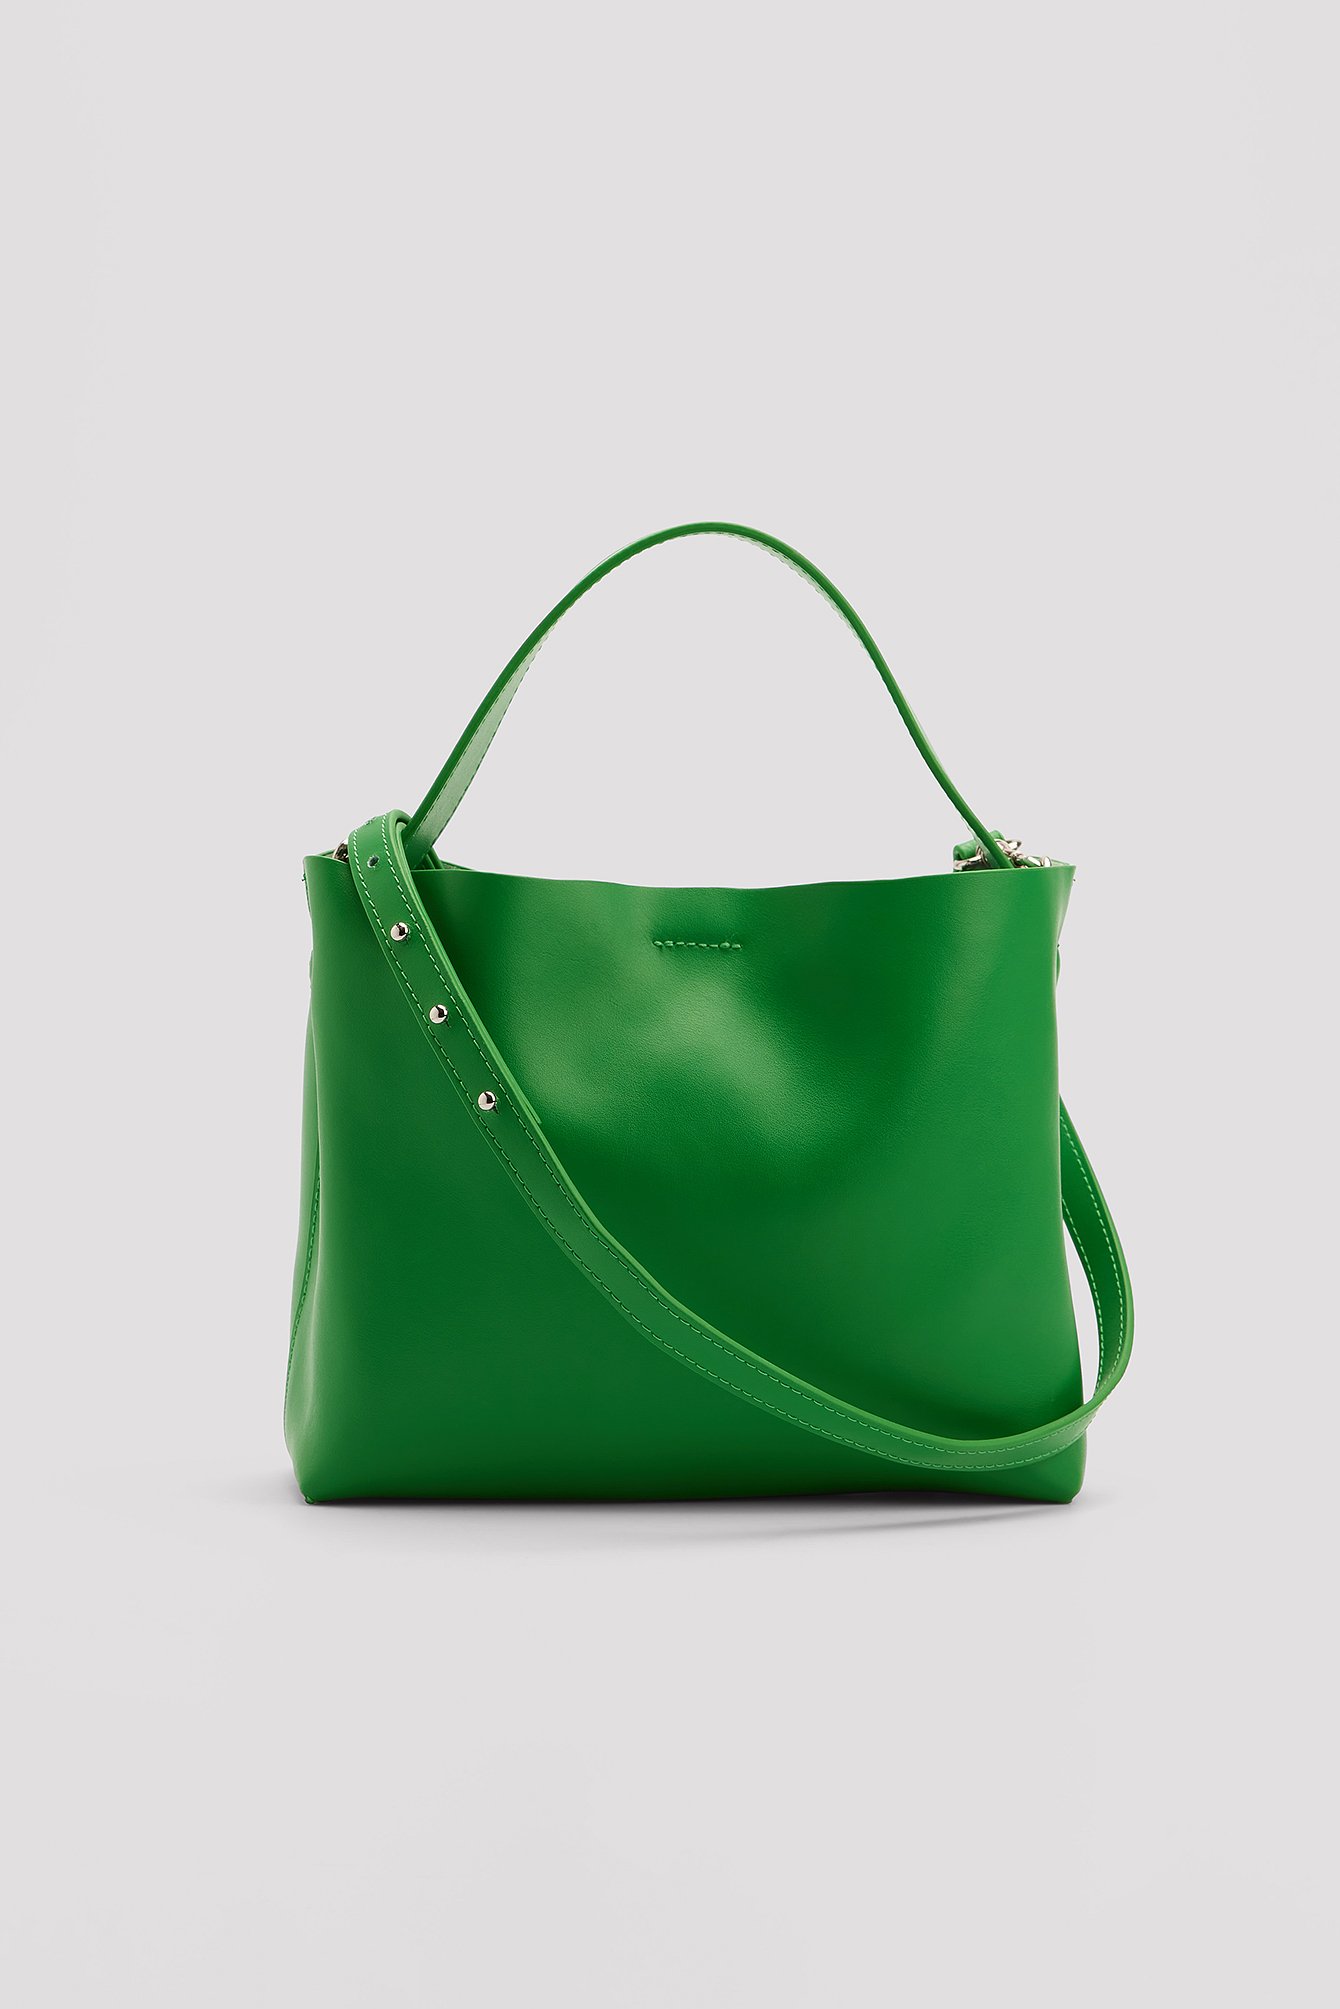 Strong Green Borsa tote in pelle